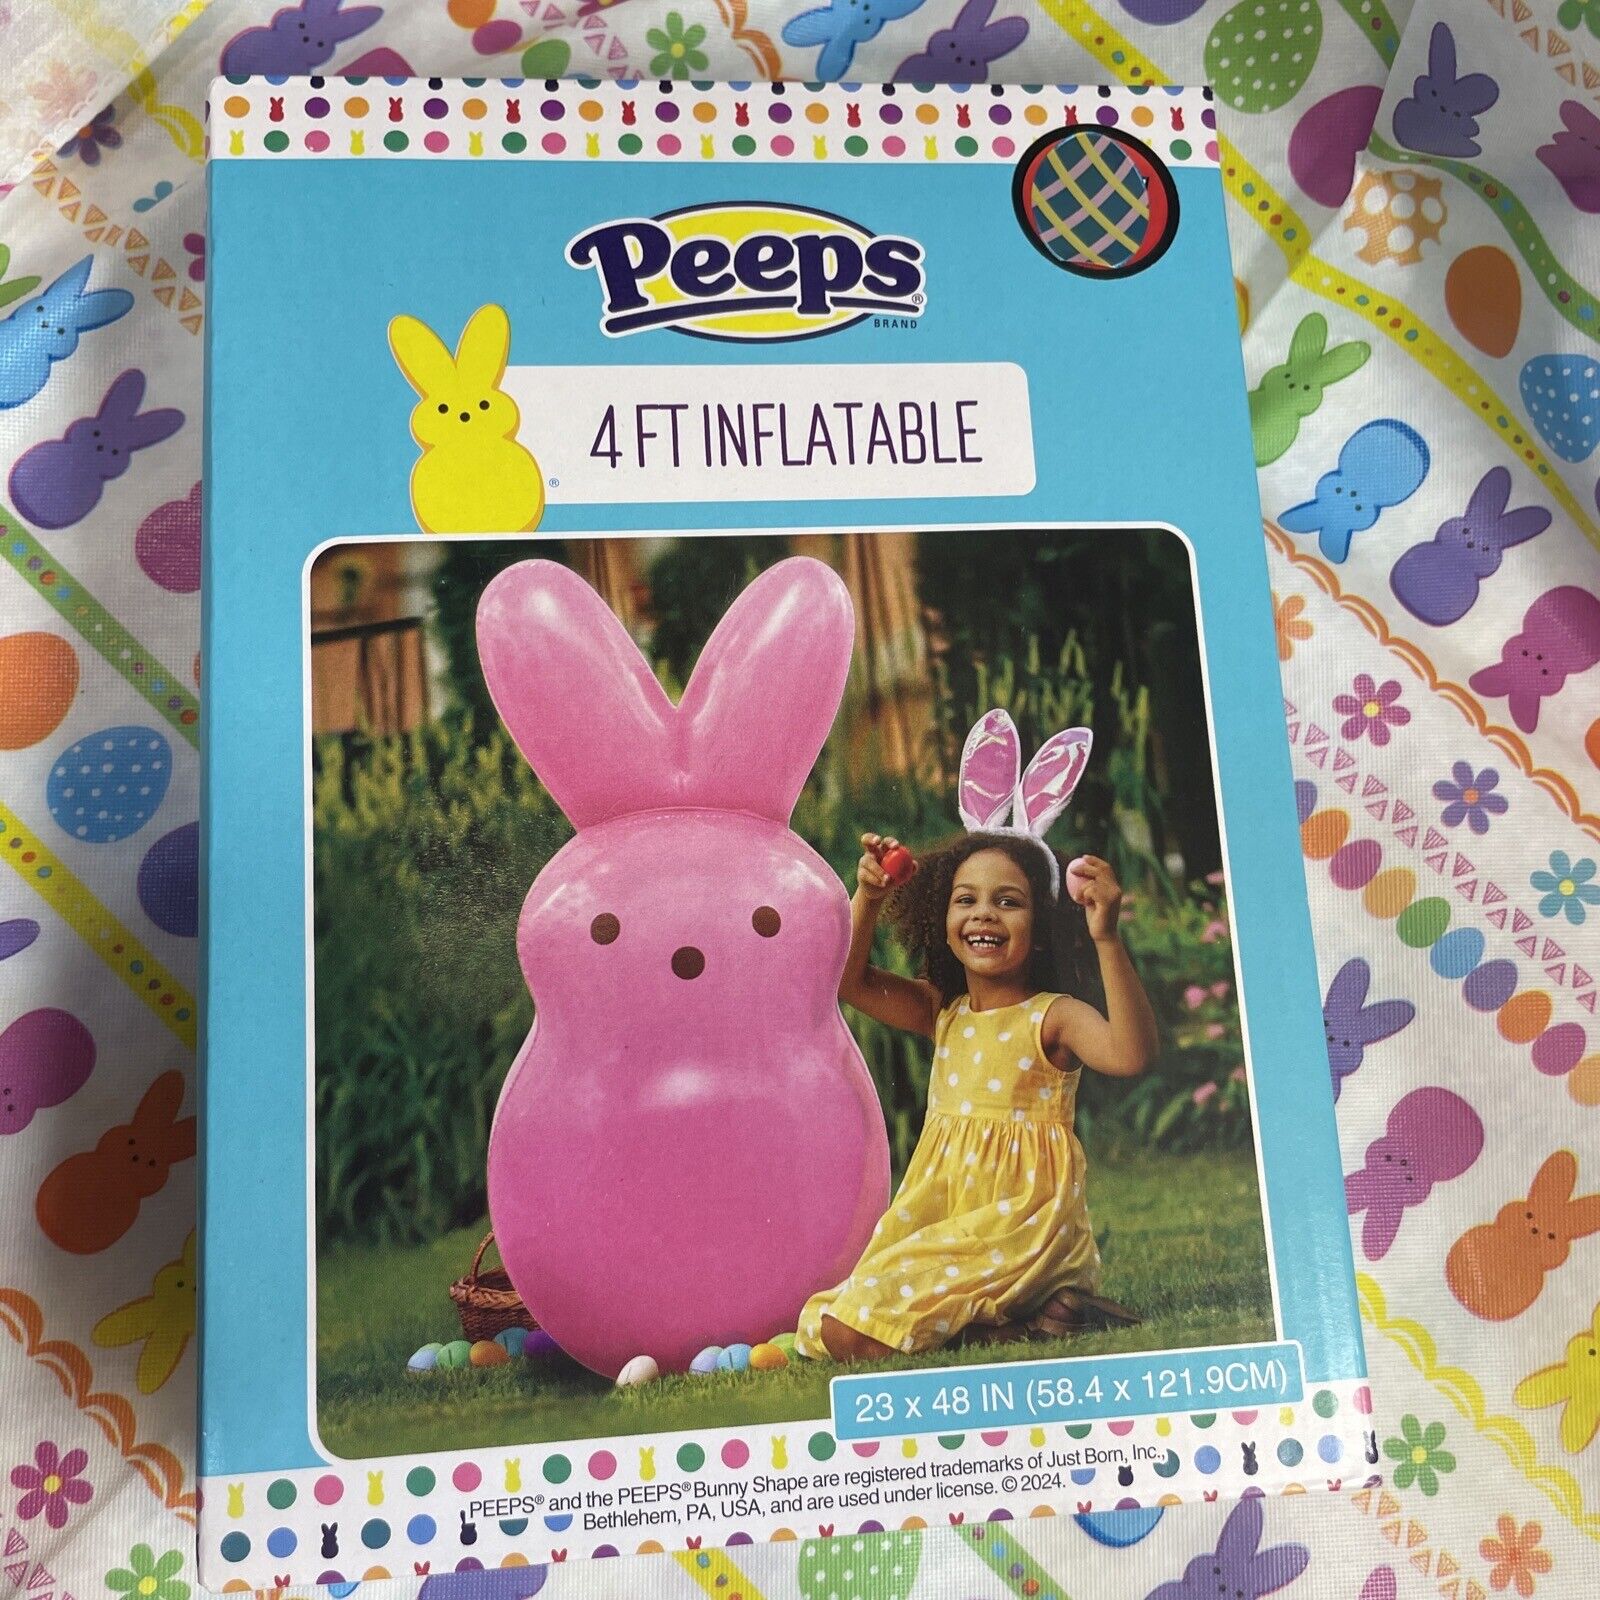 Peeps PINK 4 Ft Inflatables Brand New In Box  Bunny Rabbit Easter So Cute 🐰💕